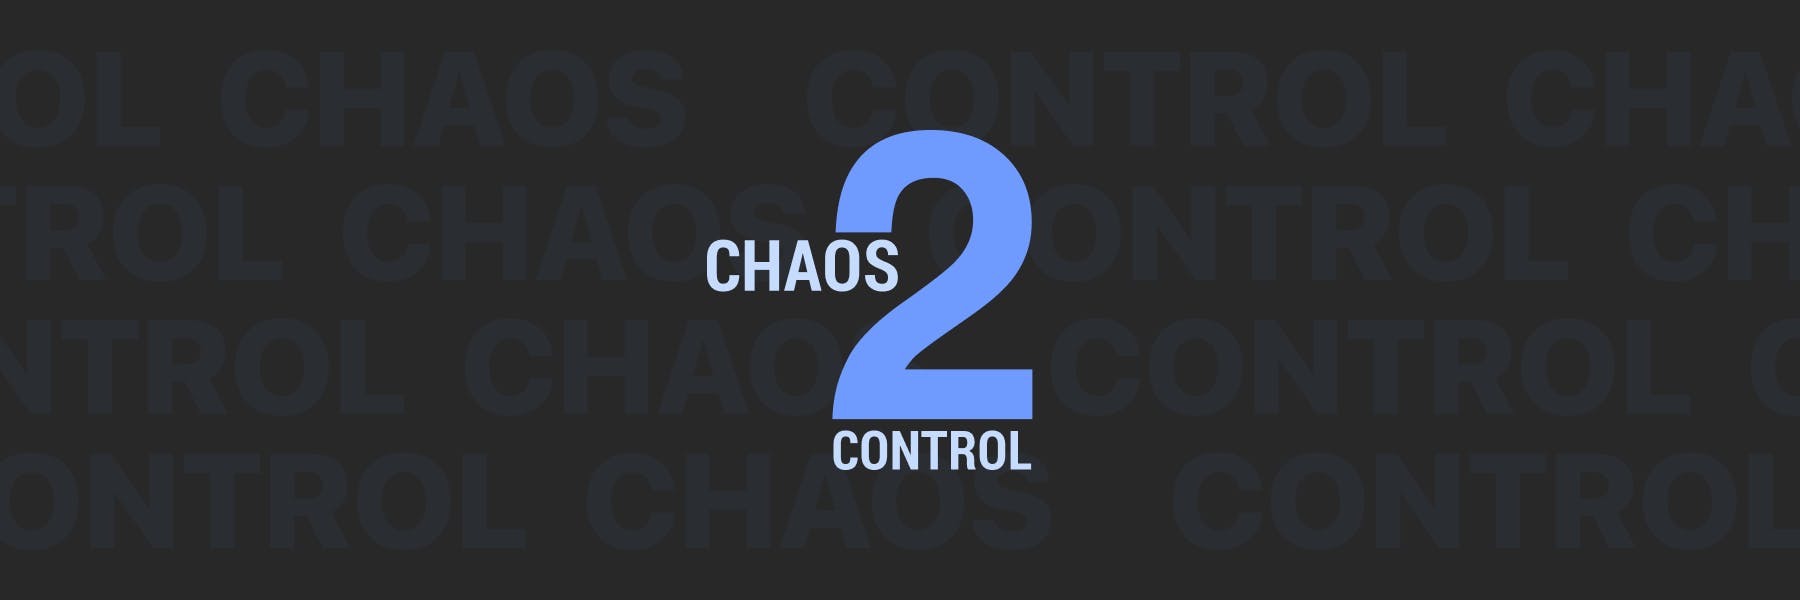 Chaos Control 2 is here